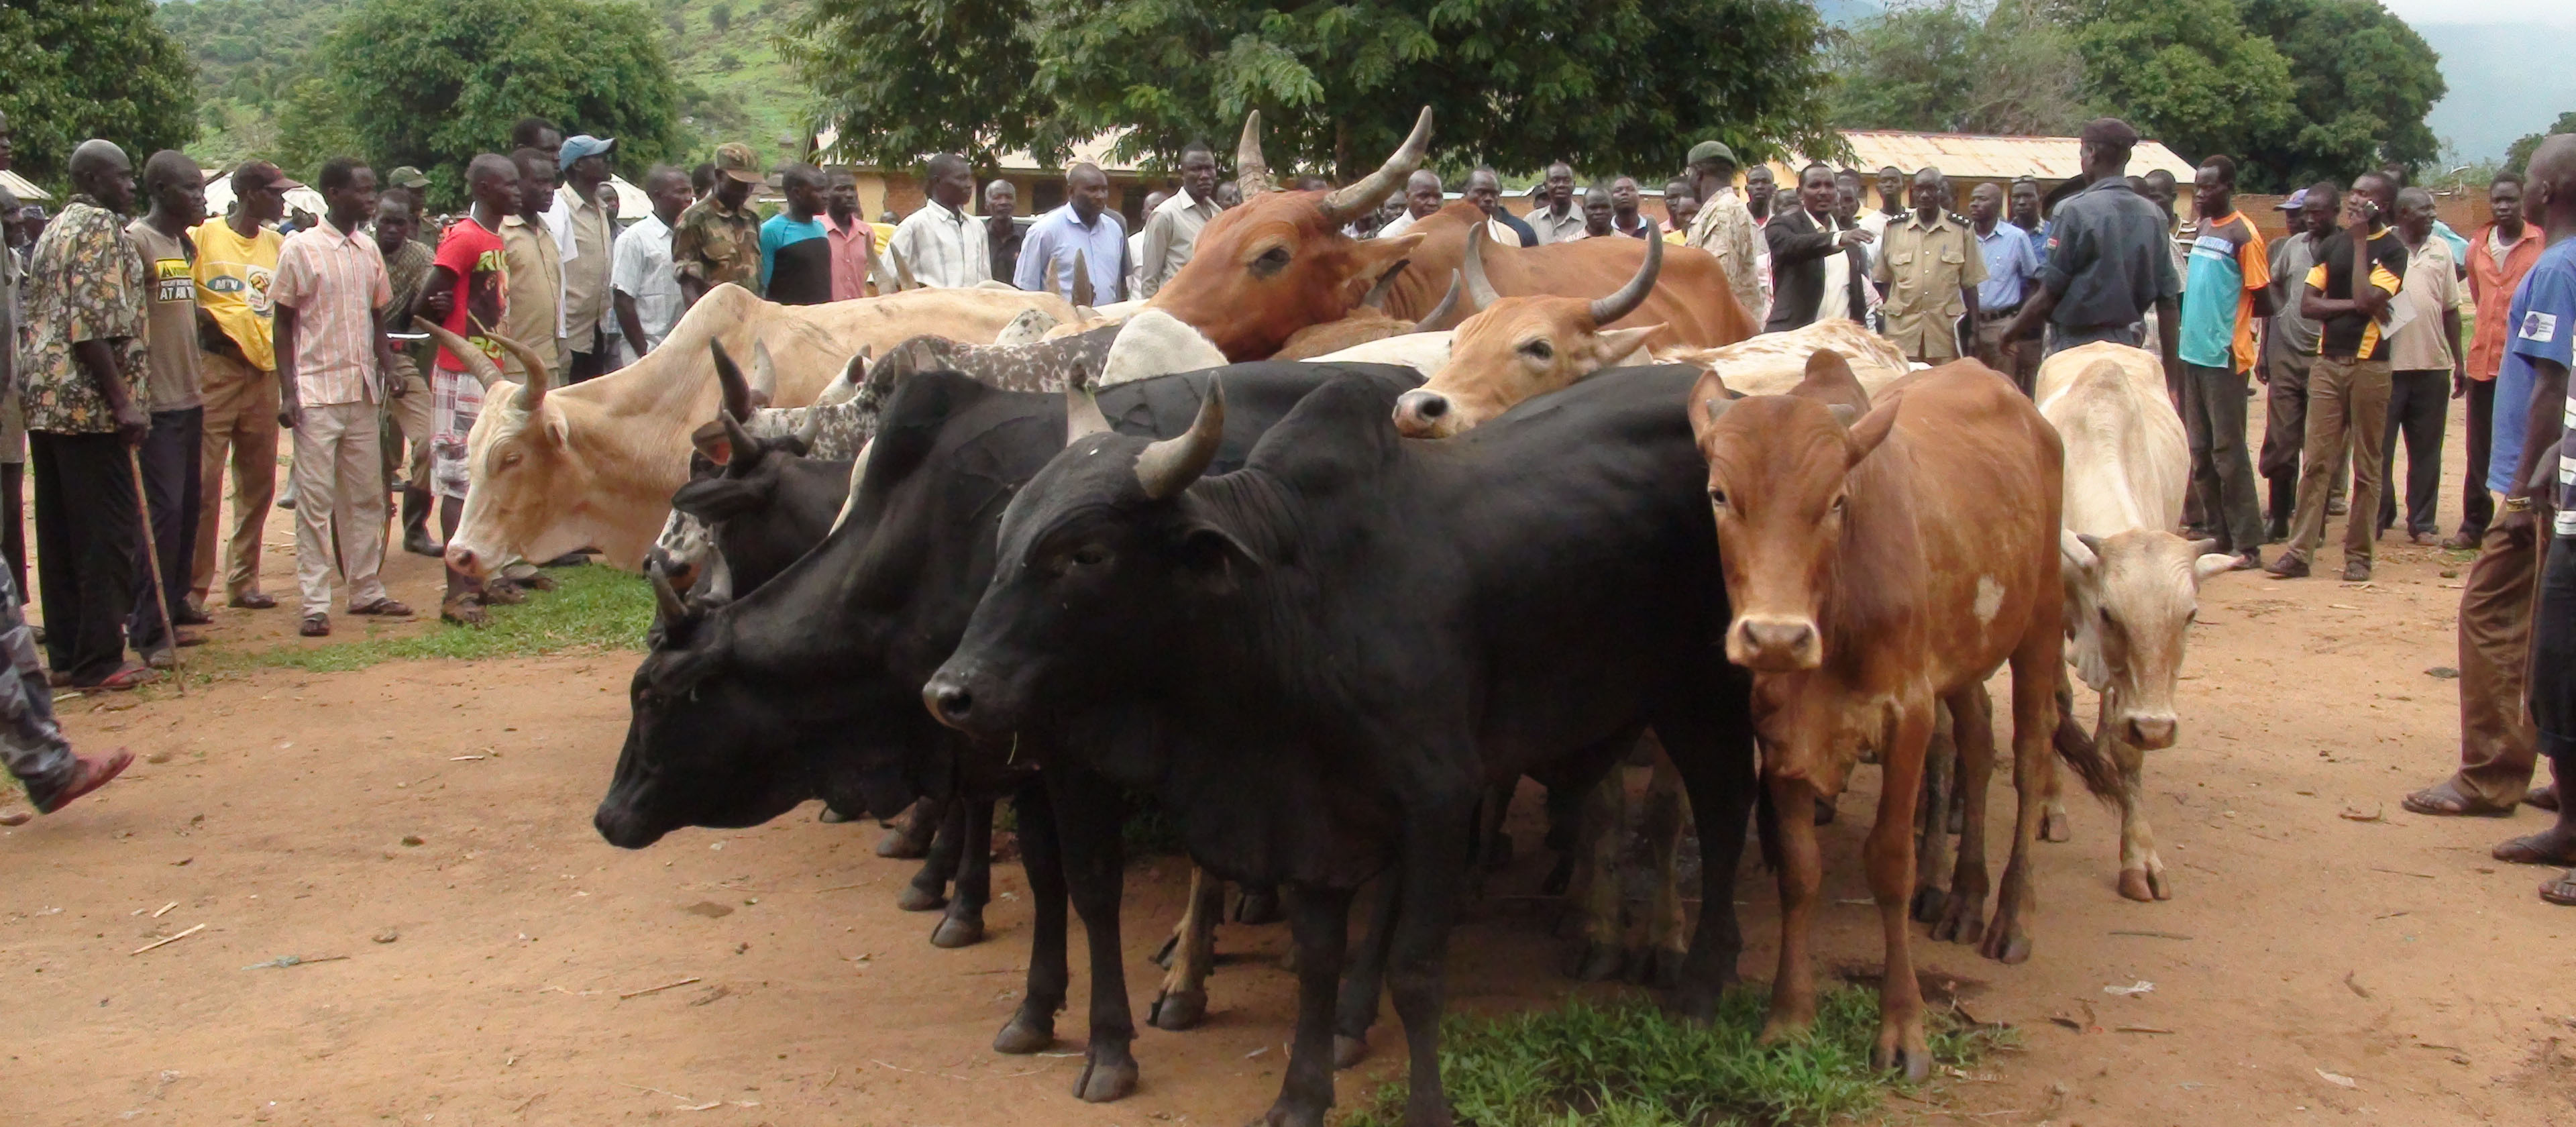 The herds of cattle stolen from Uganda by South Sudanese cattle raisers that were returned by the South Sudanese officials on Wednesday at Agoro.